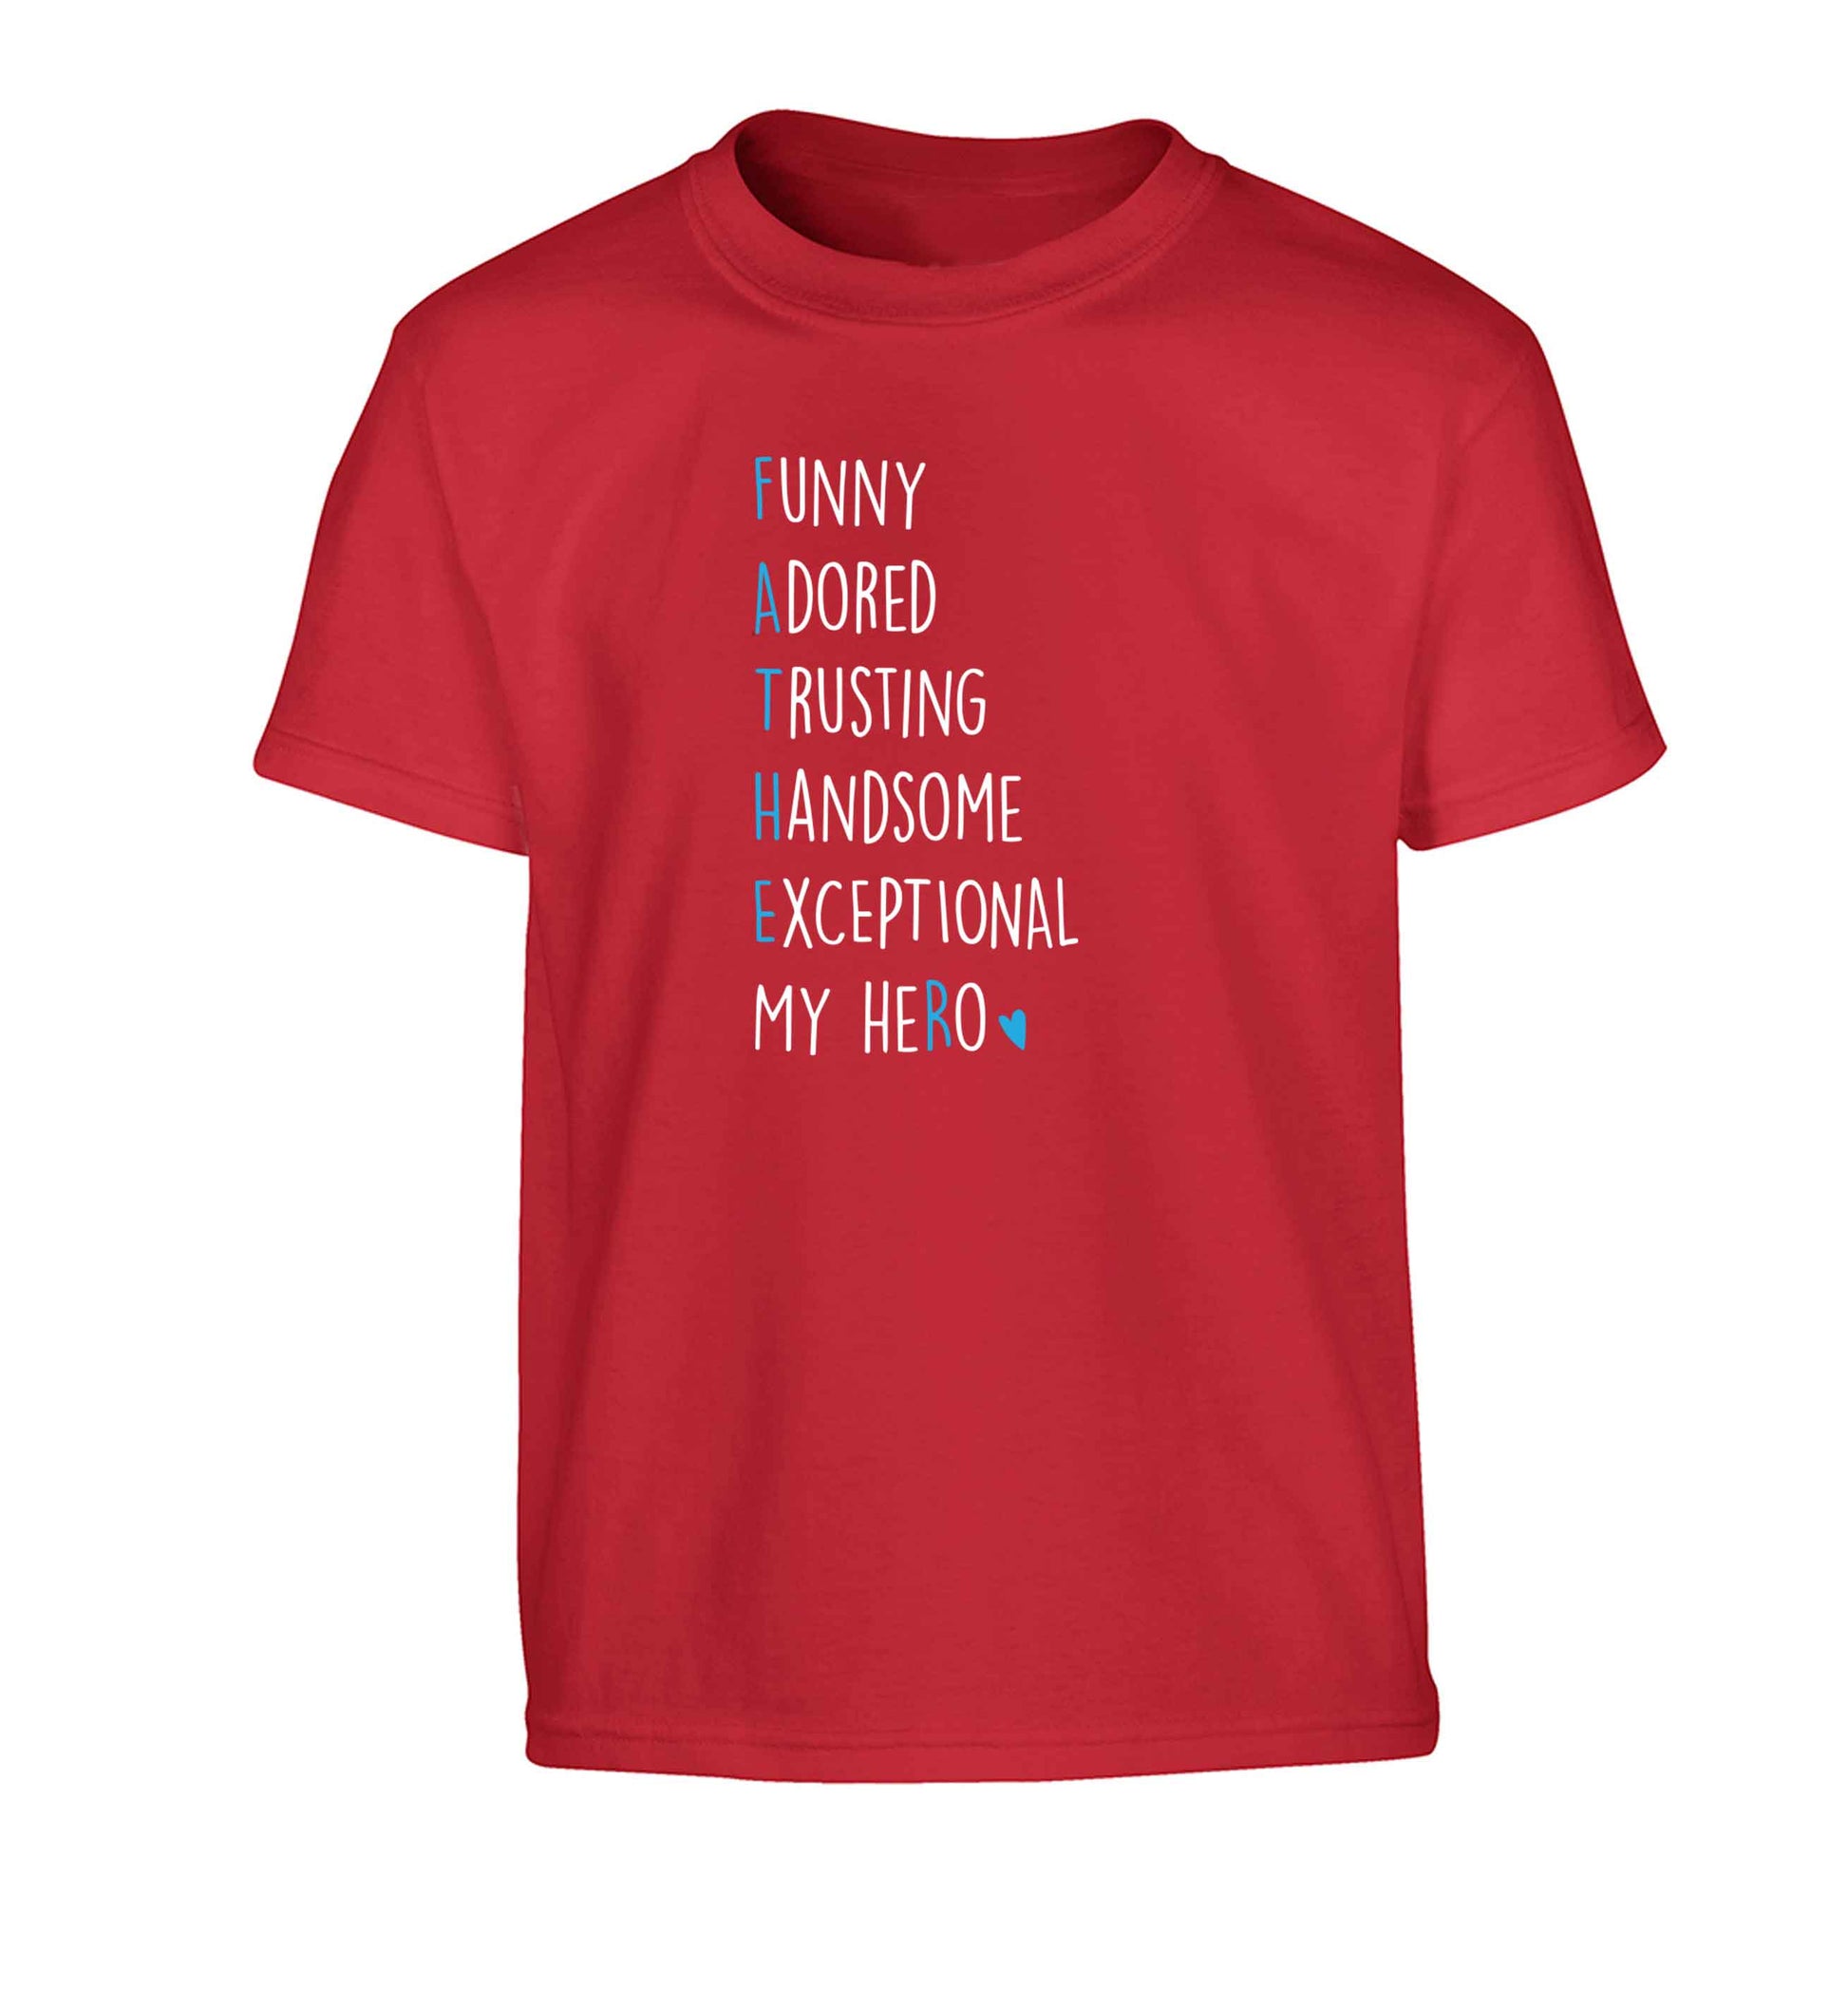 Father, funny adored trusting handsome exceptional my hero Children's red Tshirt 12-13 Years